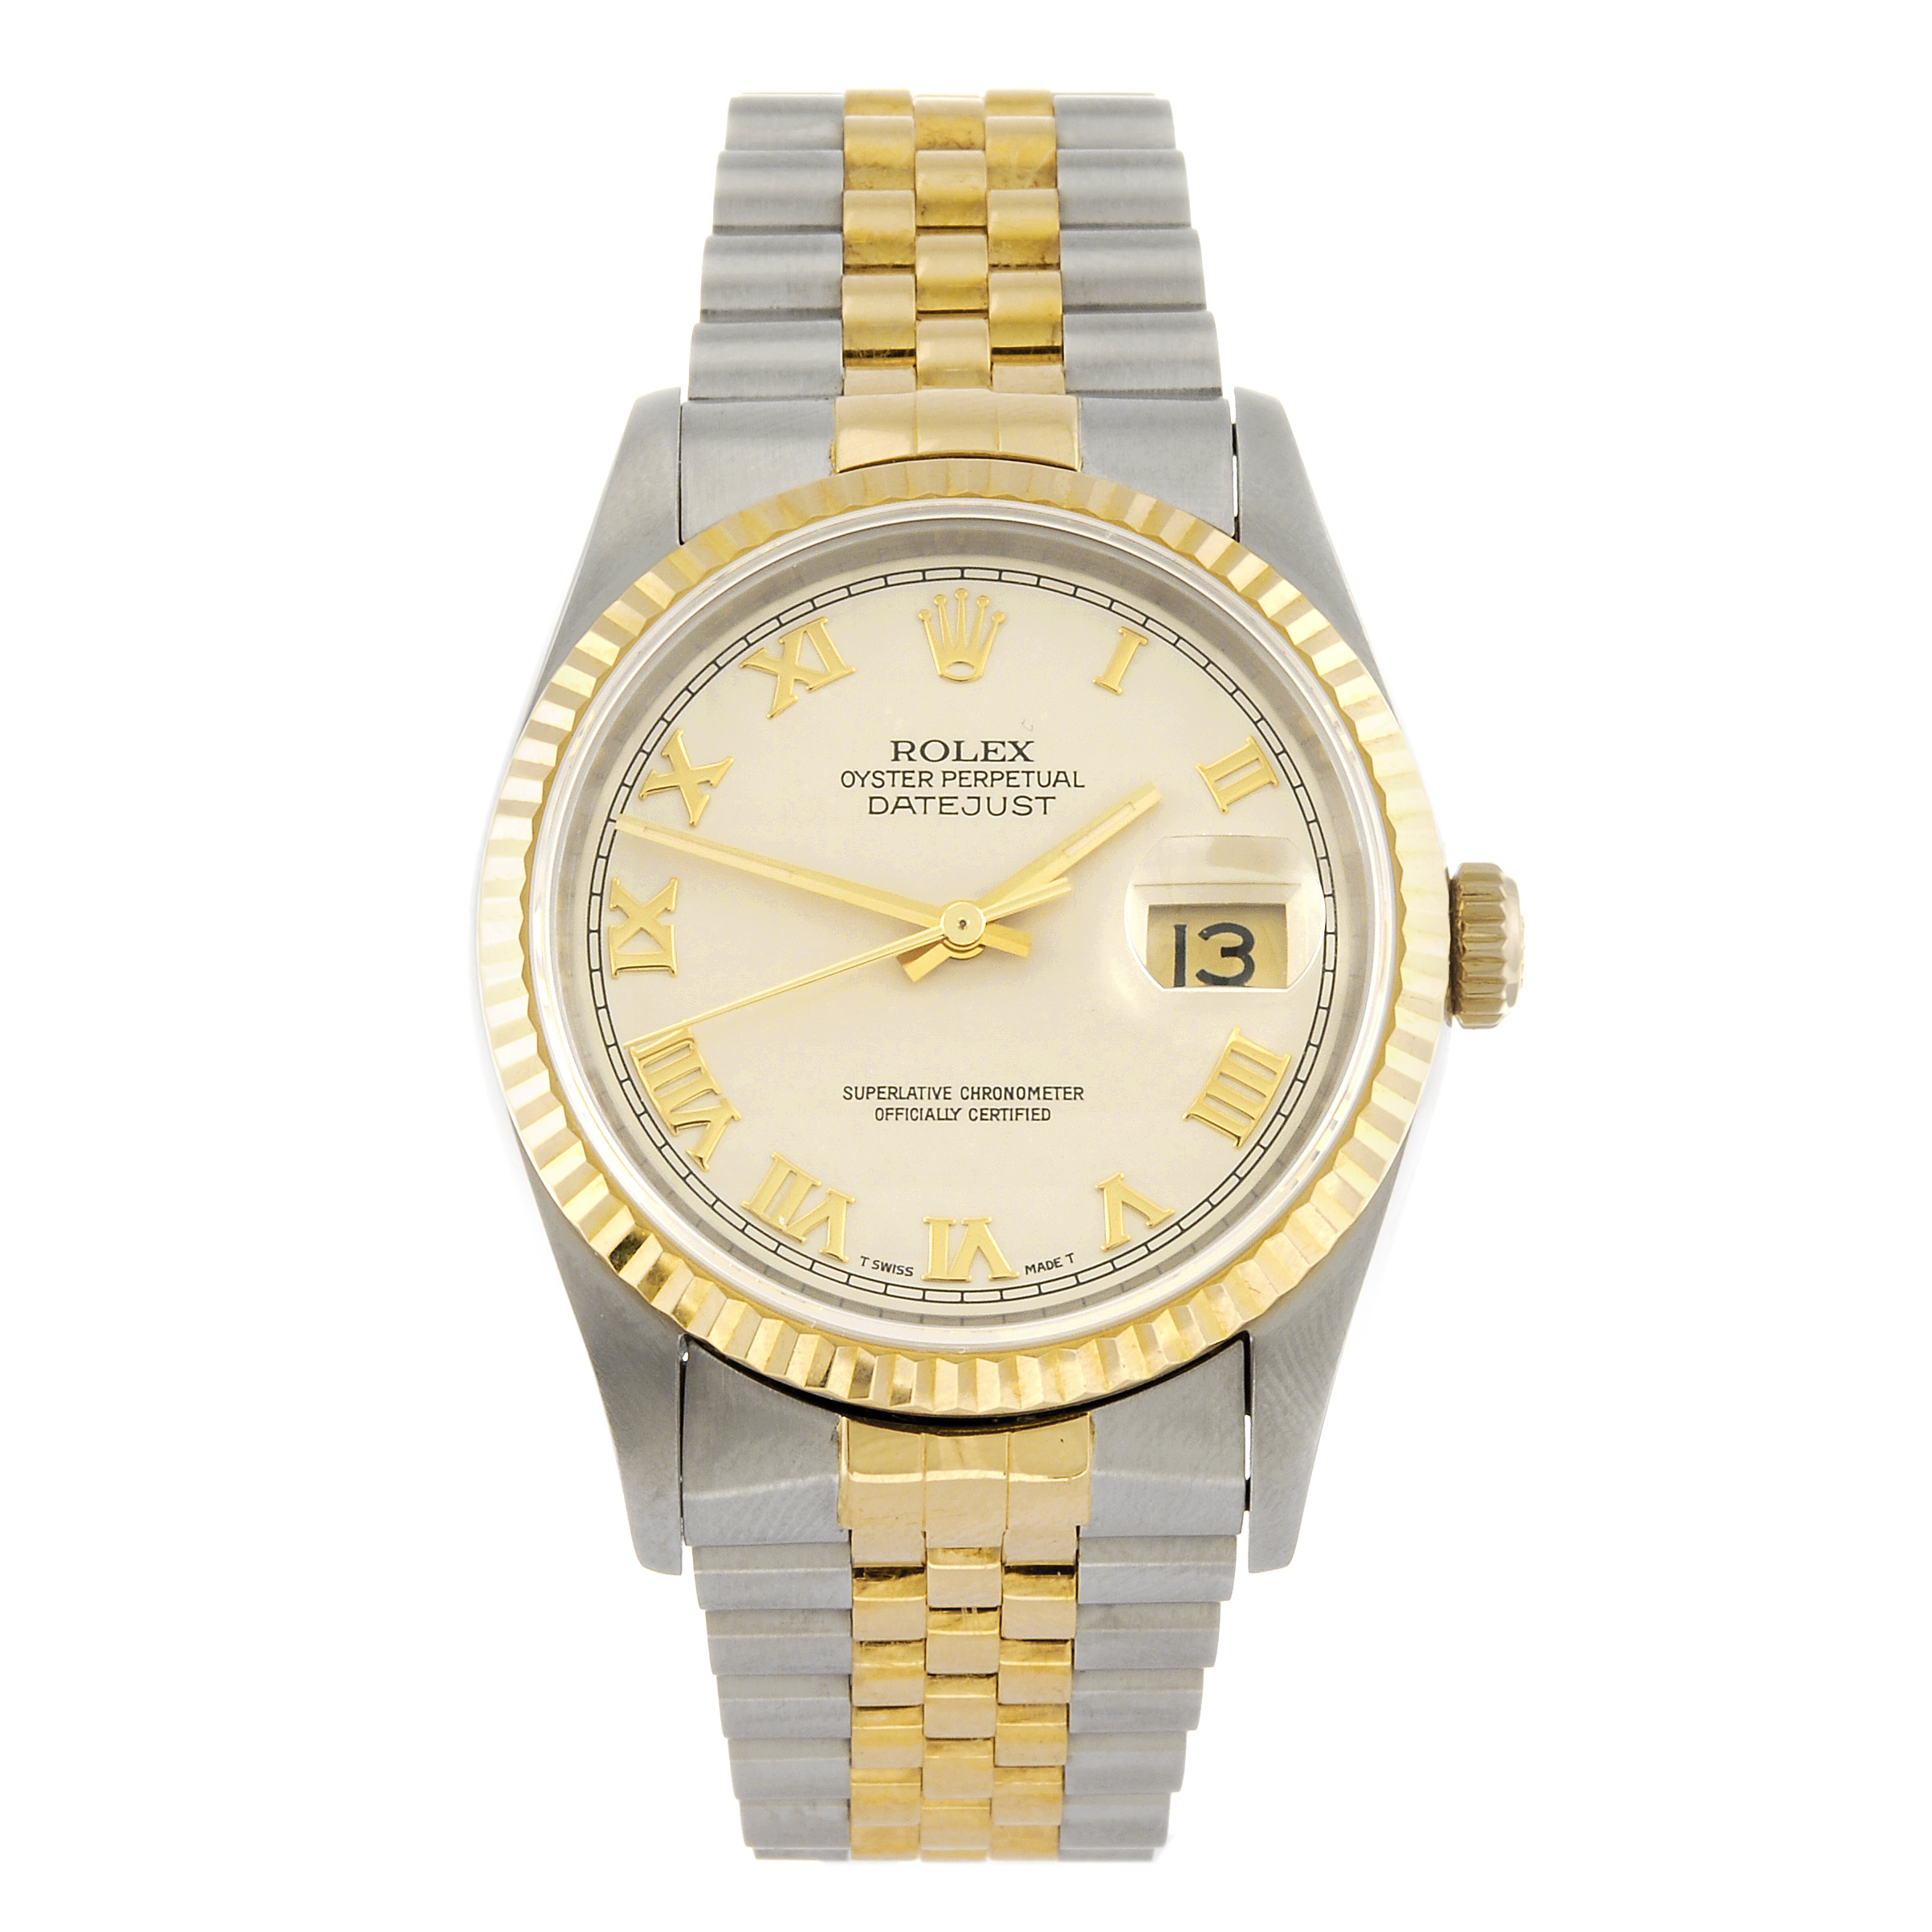 ROLEX - a gentleman's Oyster Perpetual Datejust bracelet watch. Circa 1995. Reference 16233,